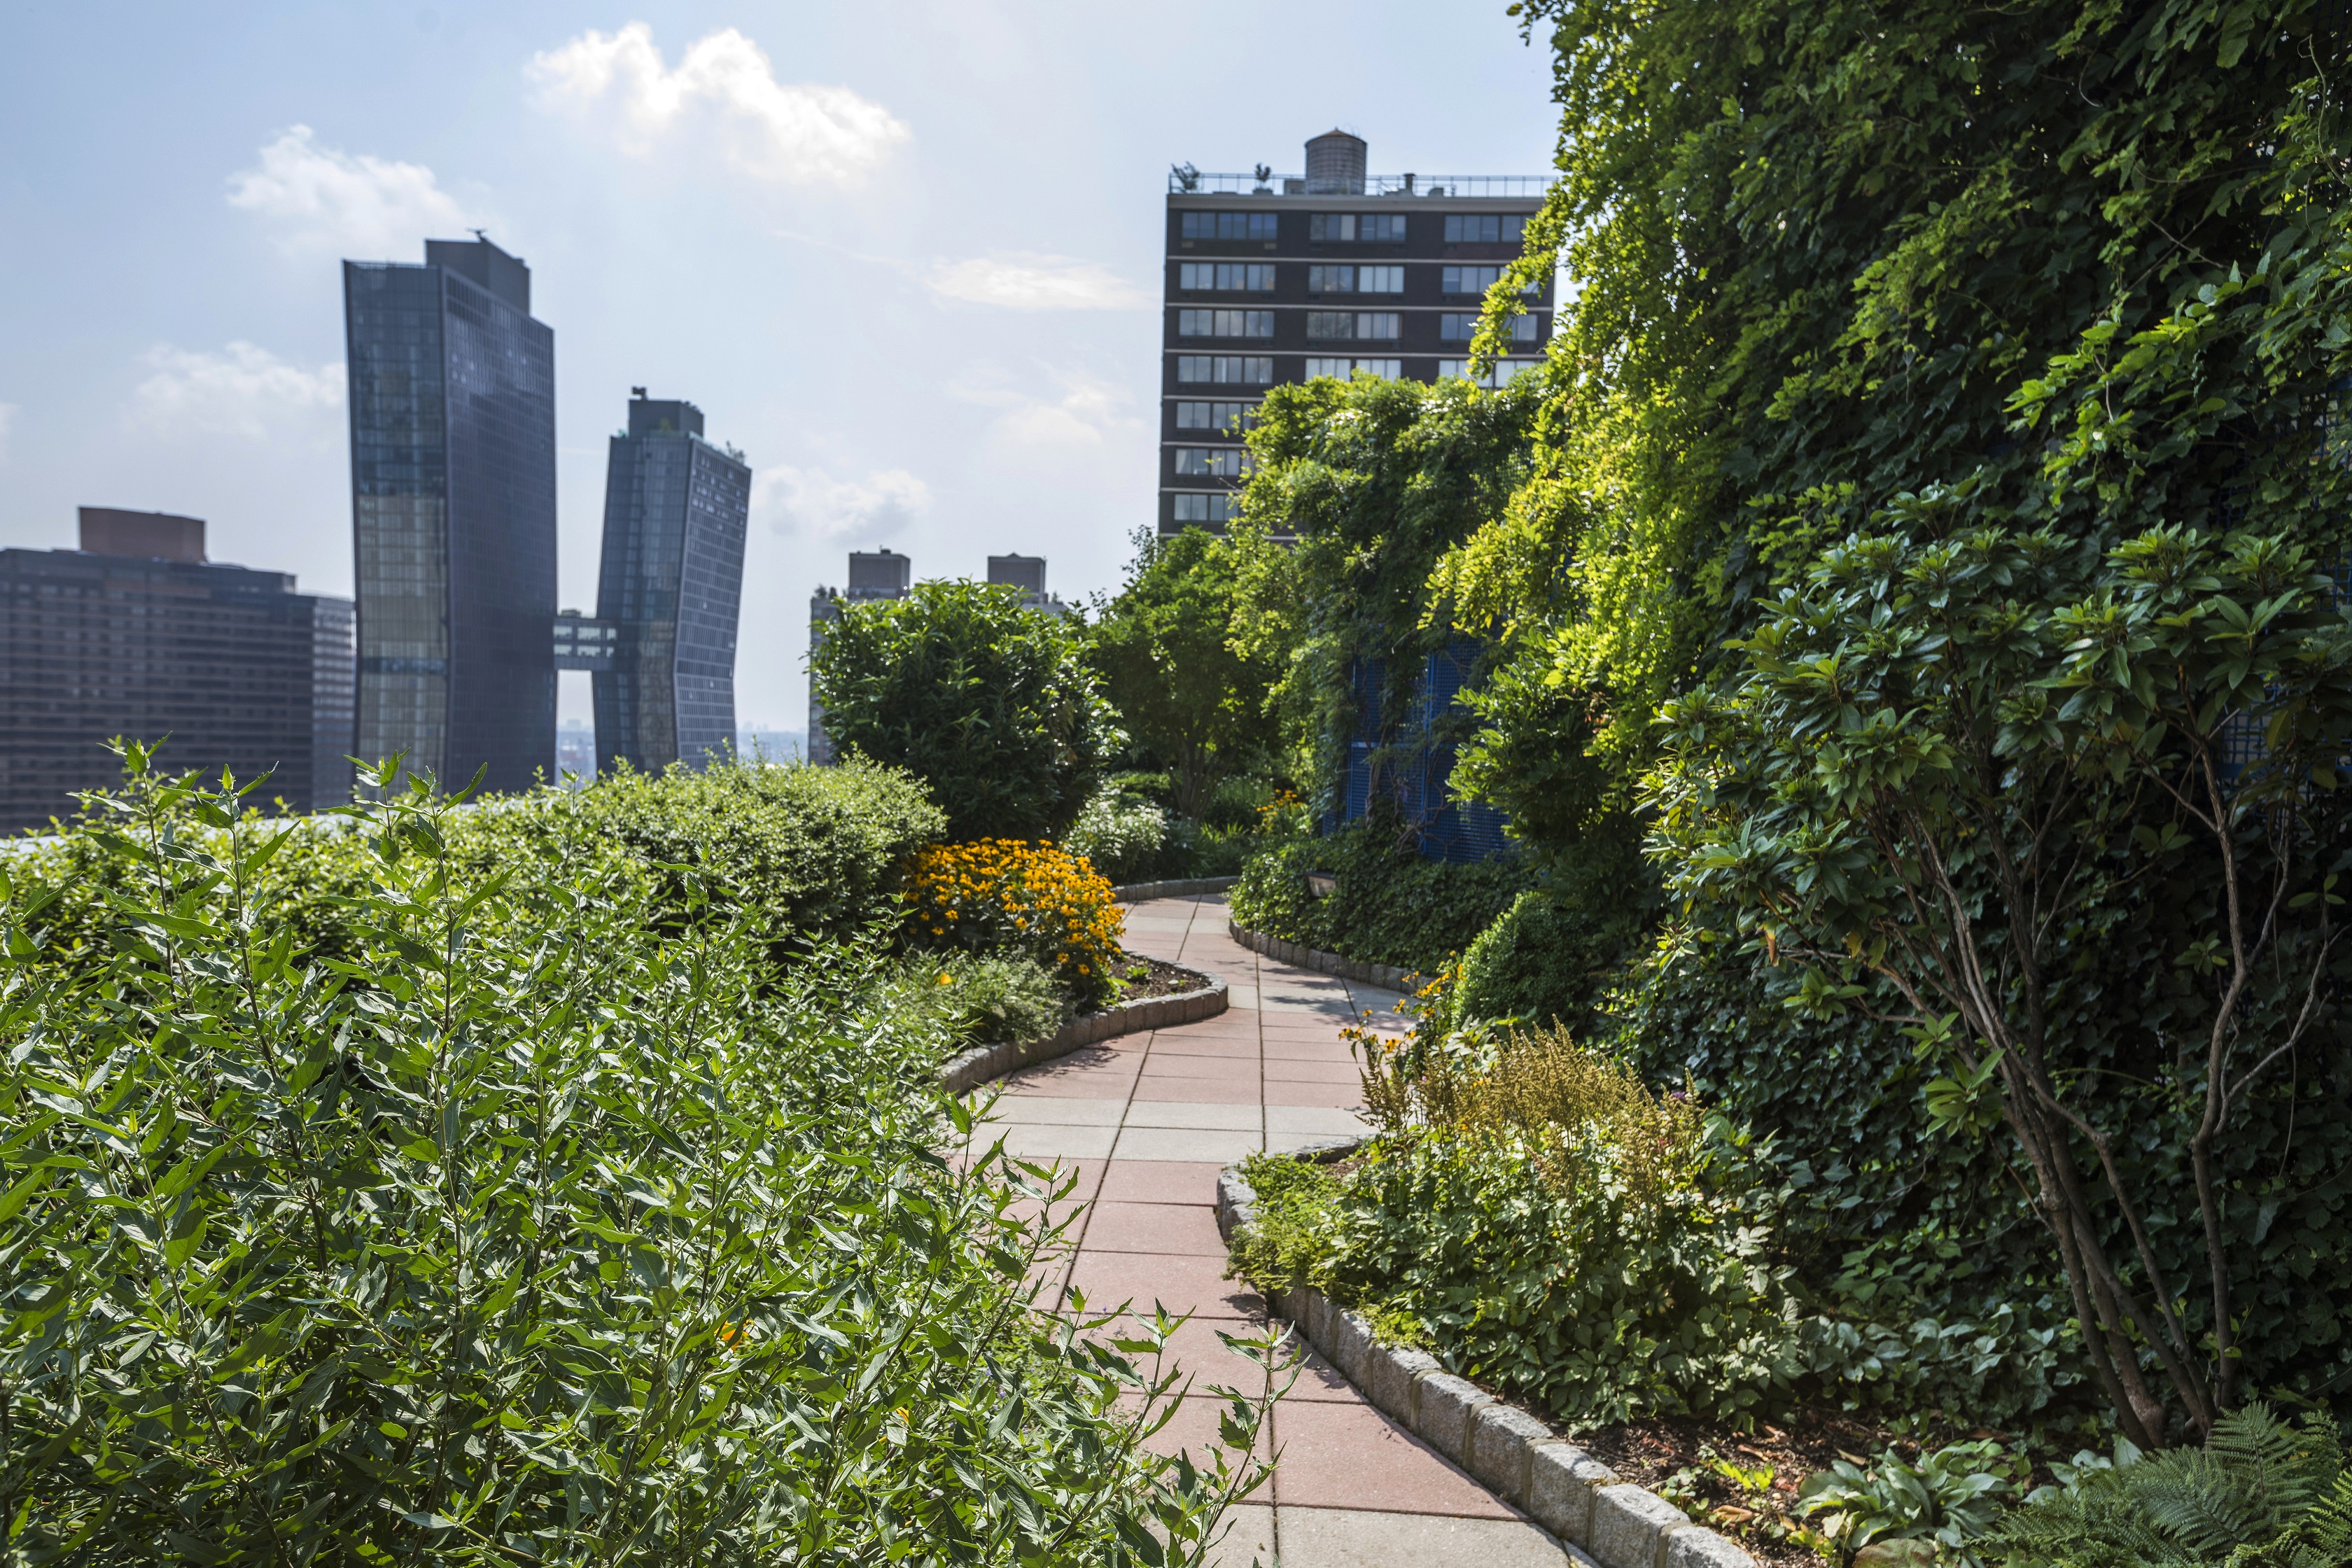 Get a bird’s eye view as you wind your way through the path of this endless rooftop garden sanctuary.